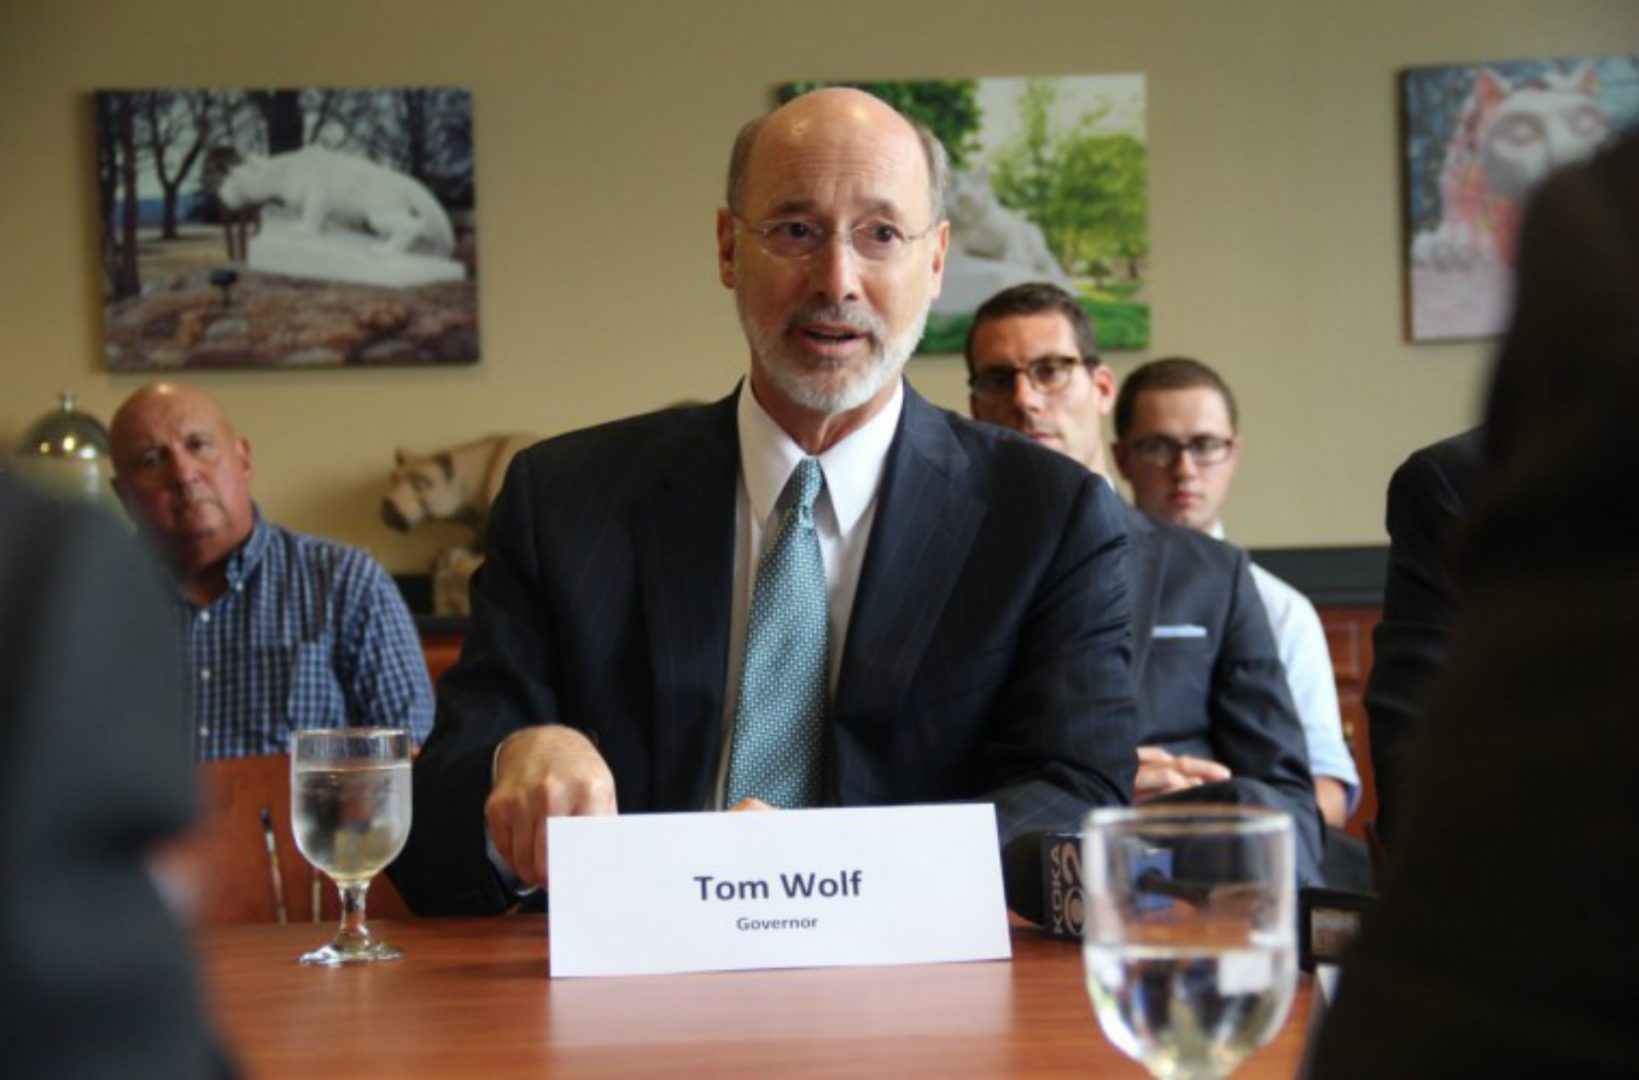 Gov. Tom Wolf hosted a roundtable discussion in Beaver County in 2016 to tout the benefits of the ethane cracker plant Shell is planning to build.